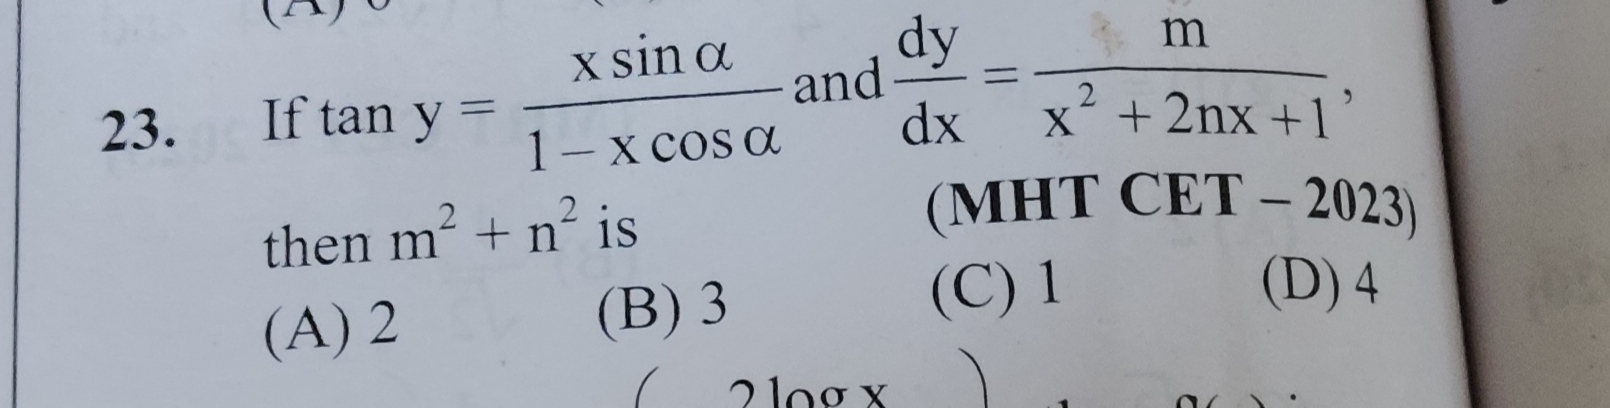 If tany=1−xcosαxsinα​ and dxdy​=x2+2nx+1m​, then m2+n2 is (MHT CET - 2